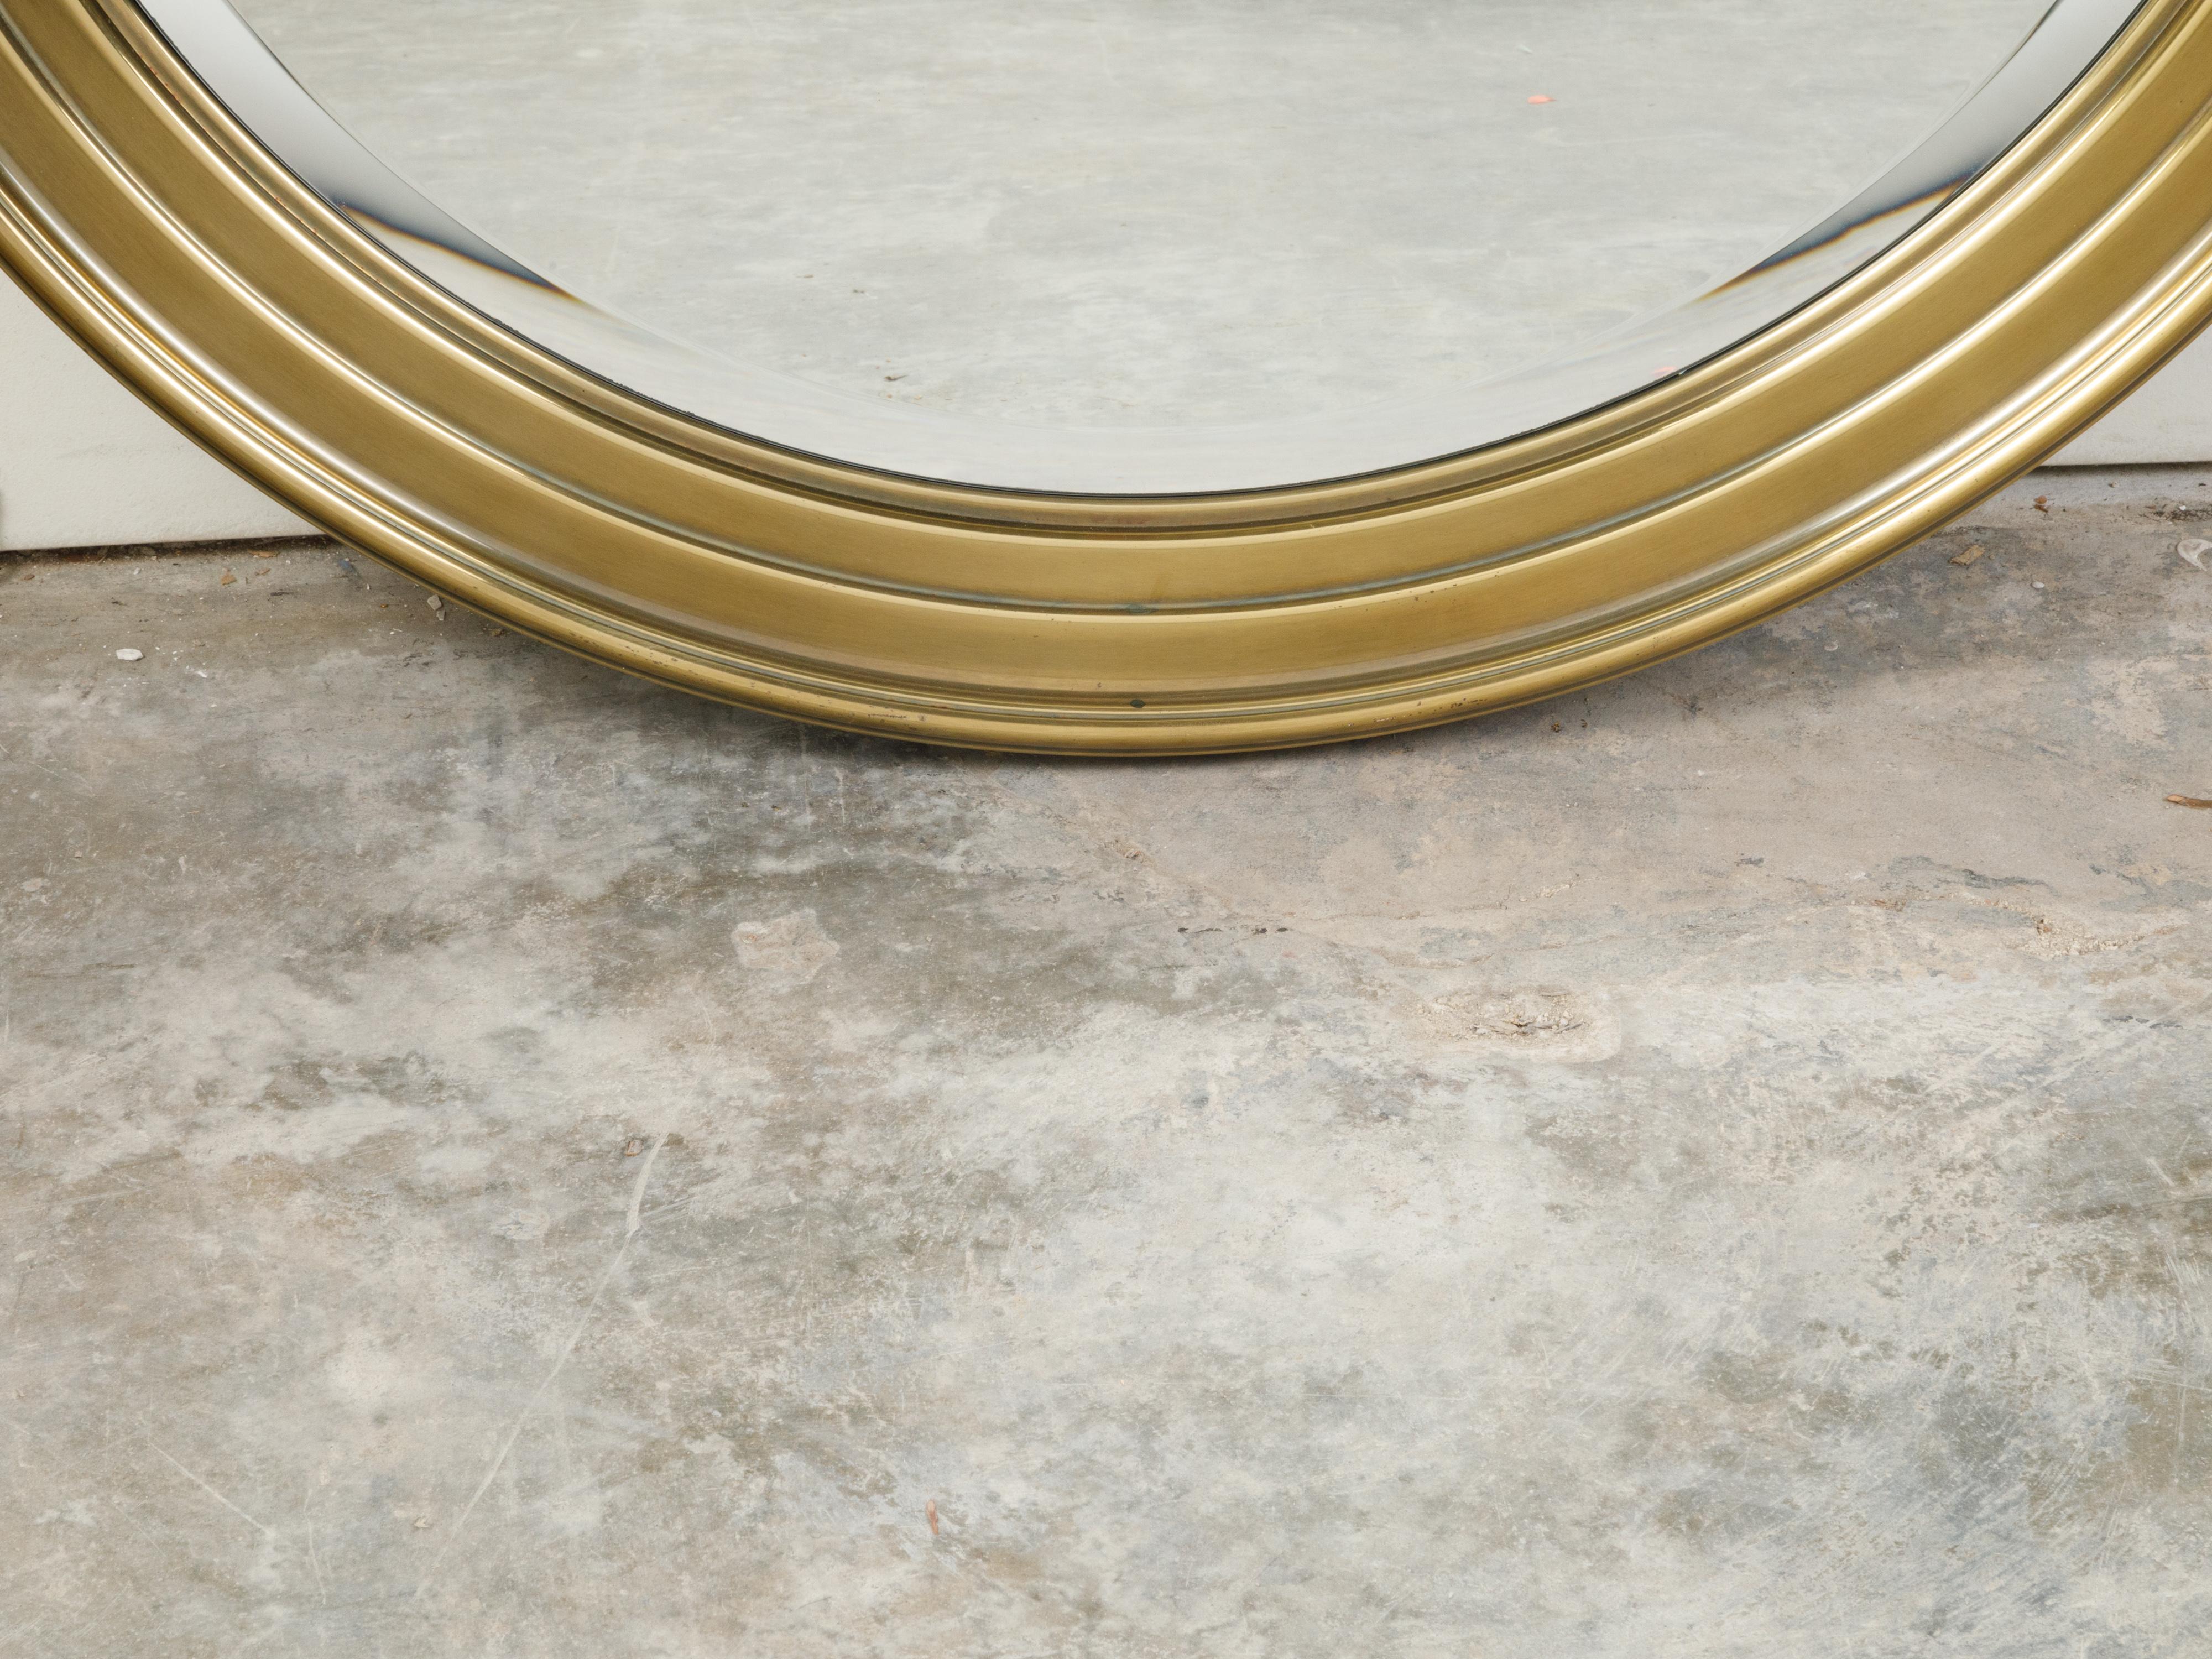 20th Century Midcentury Brass Circular Mirror with Stepped Frame and Beveled Edge For Sale